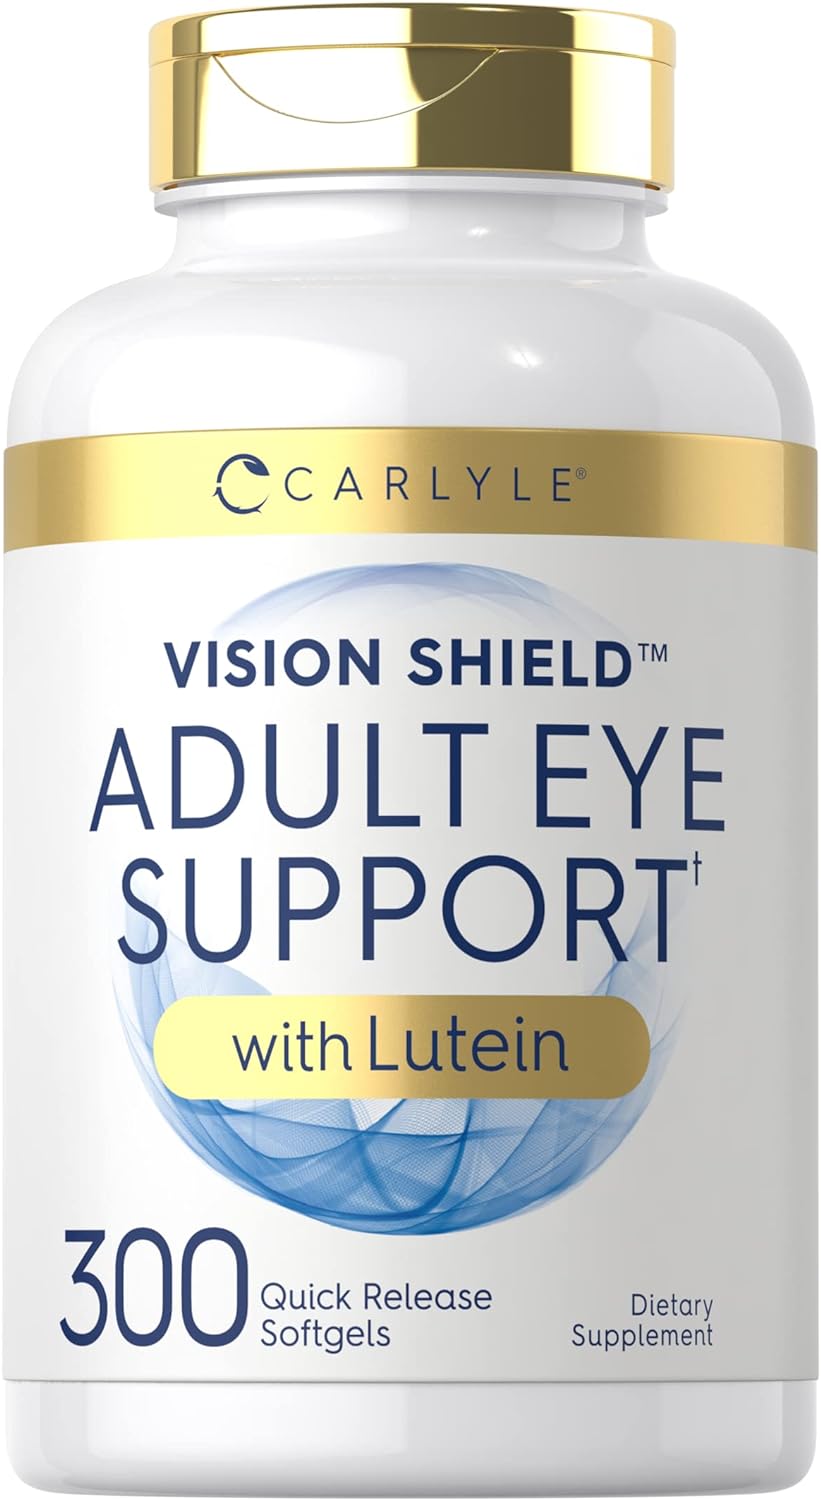 Carlyle Adult Eye Support | 300 Capsules | with Lutein and Zeaxanthin | Non-GMO and Gluten Free Supplement